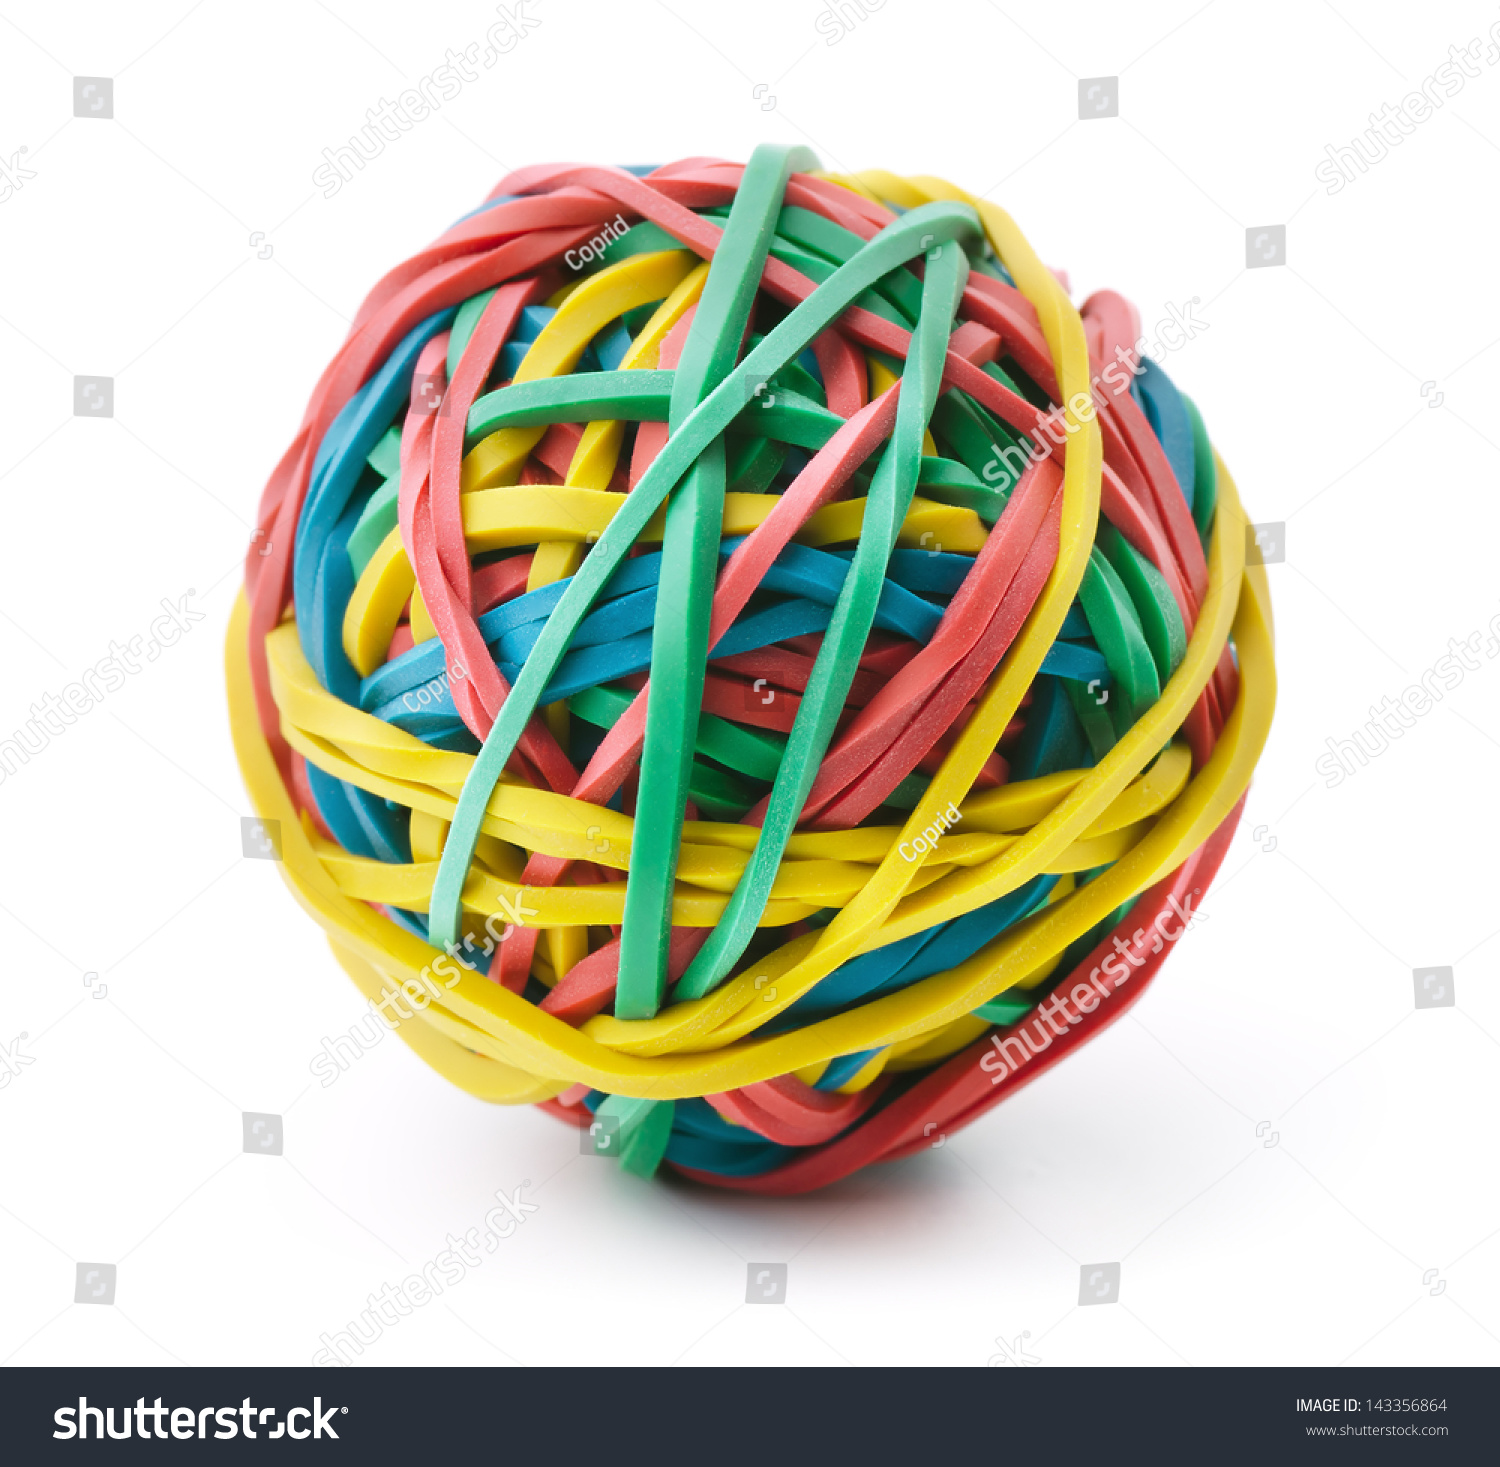 Colorful rubber band ball isolated on white #143356864